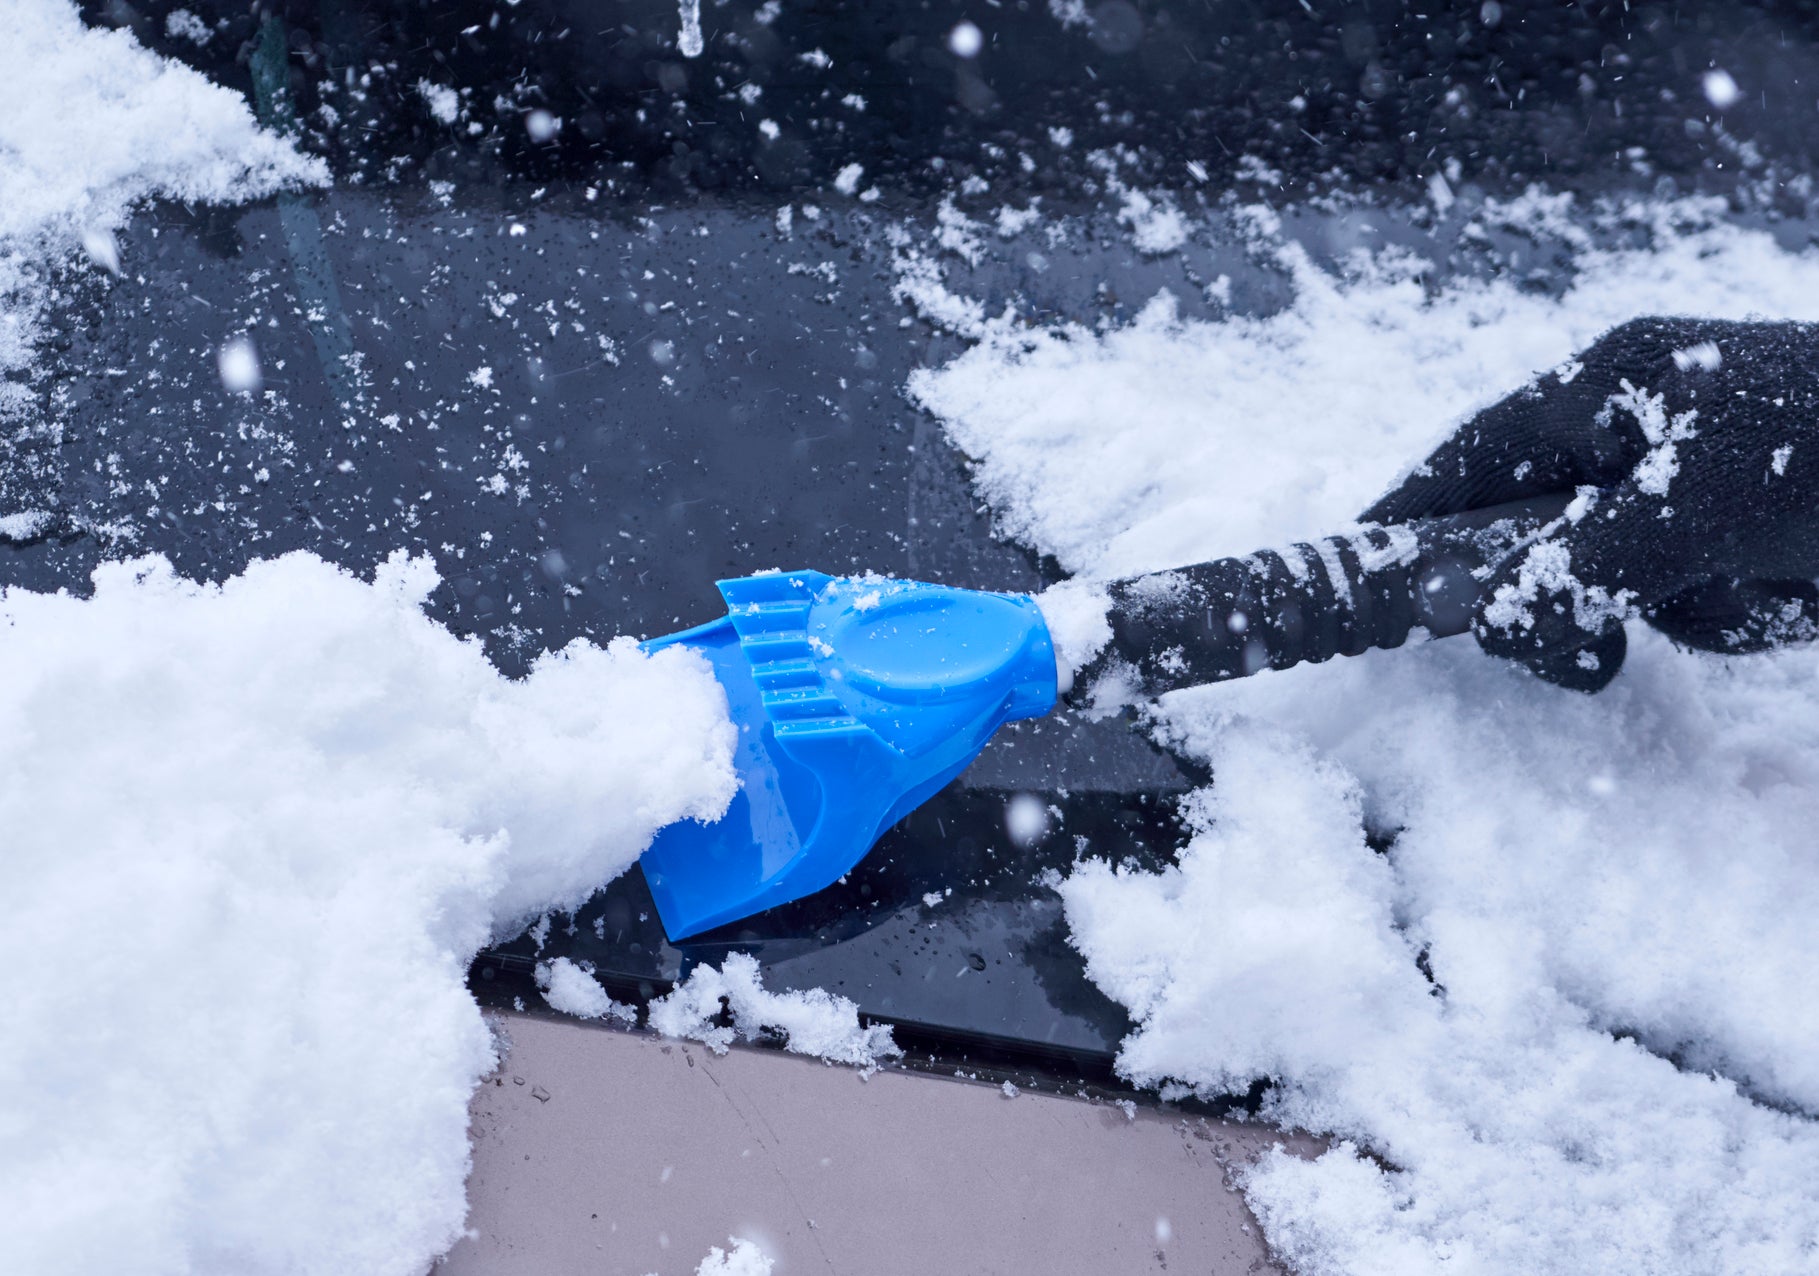 Extendable Snow Brush with Ice Scraper and Squeegee 